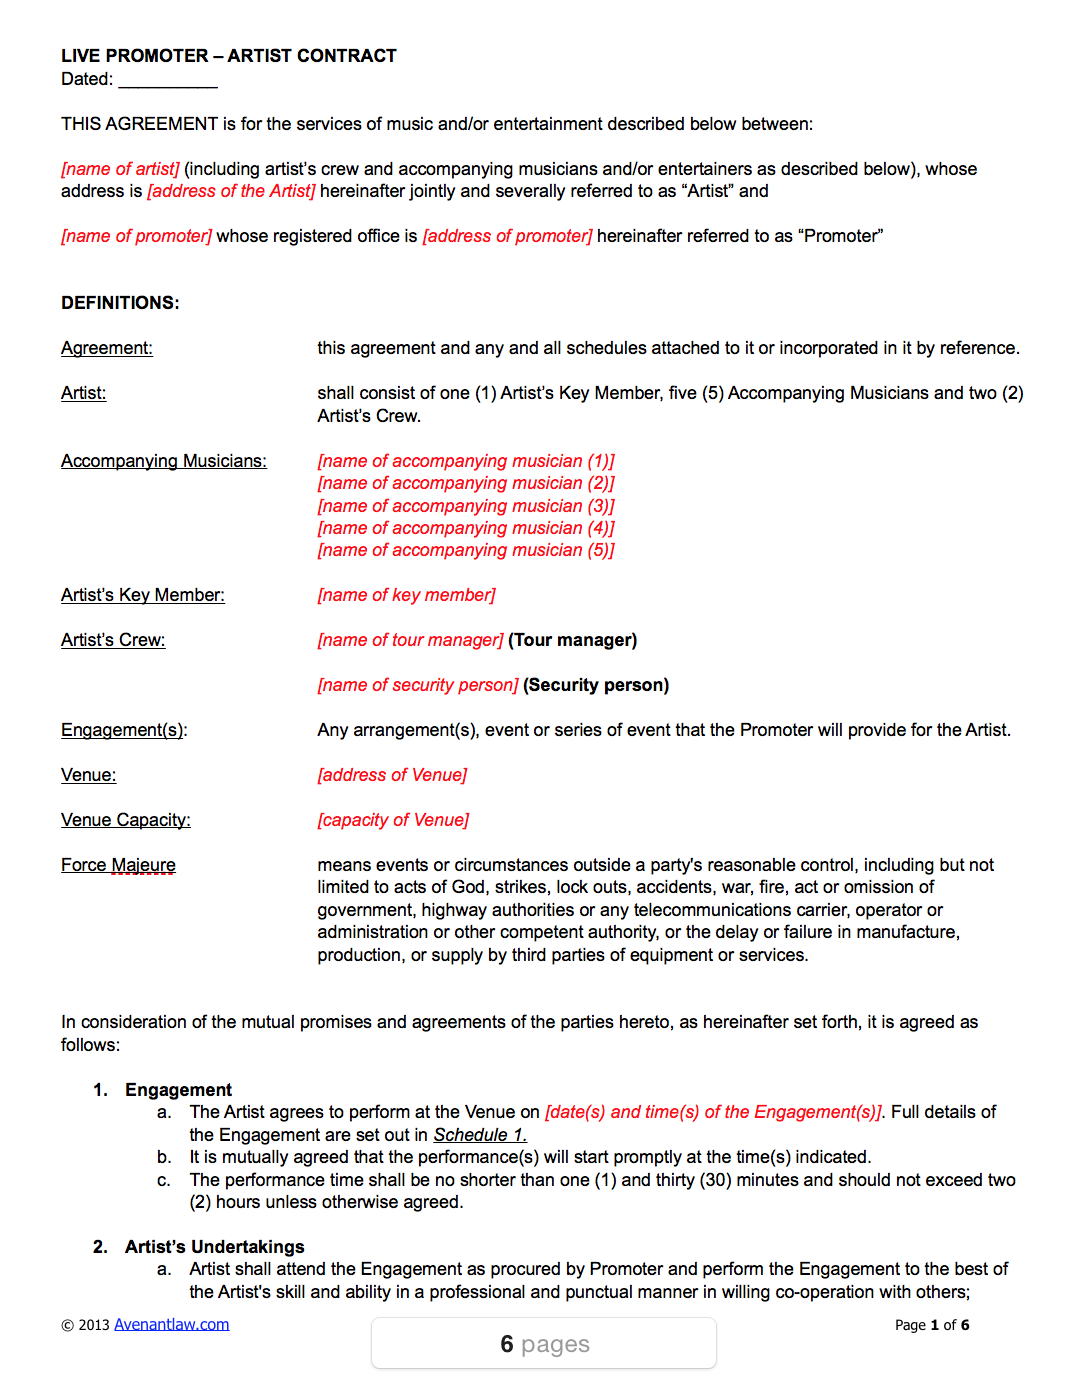 Simple Agreement Contract Live Promoter Artist Contract Template